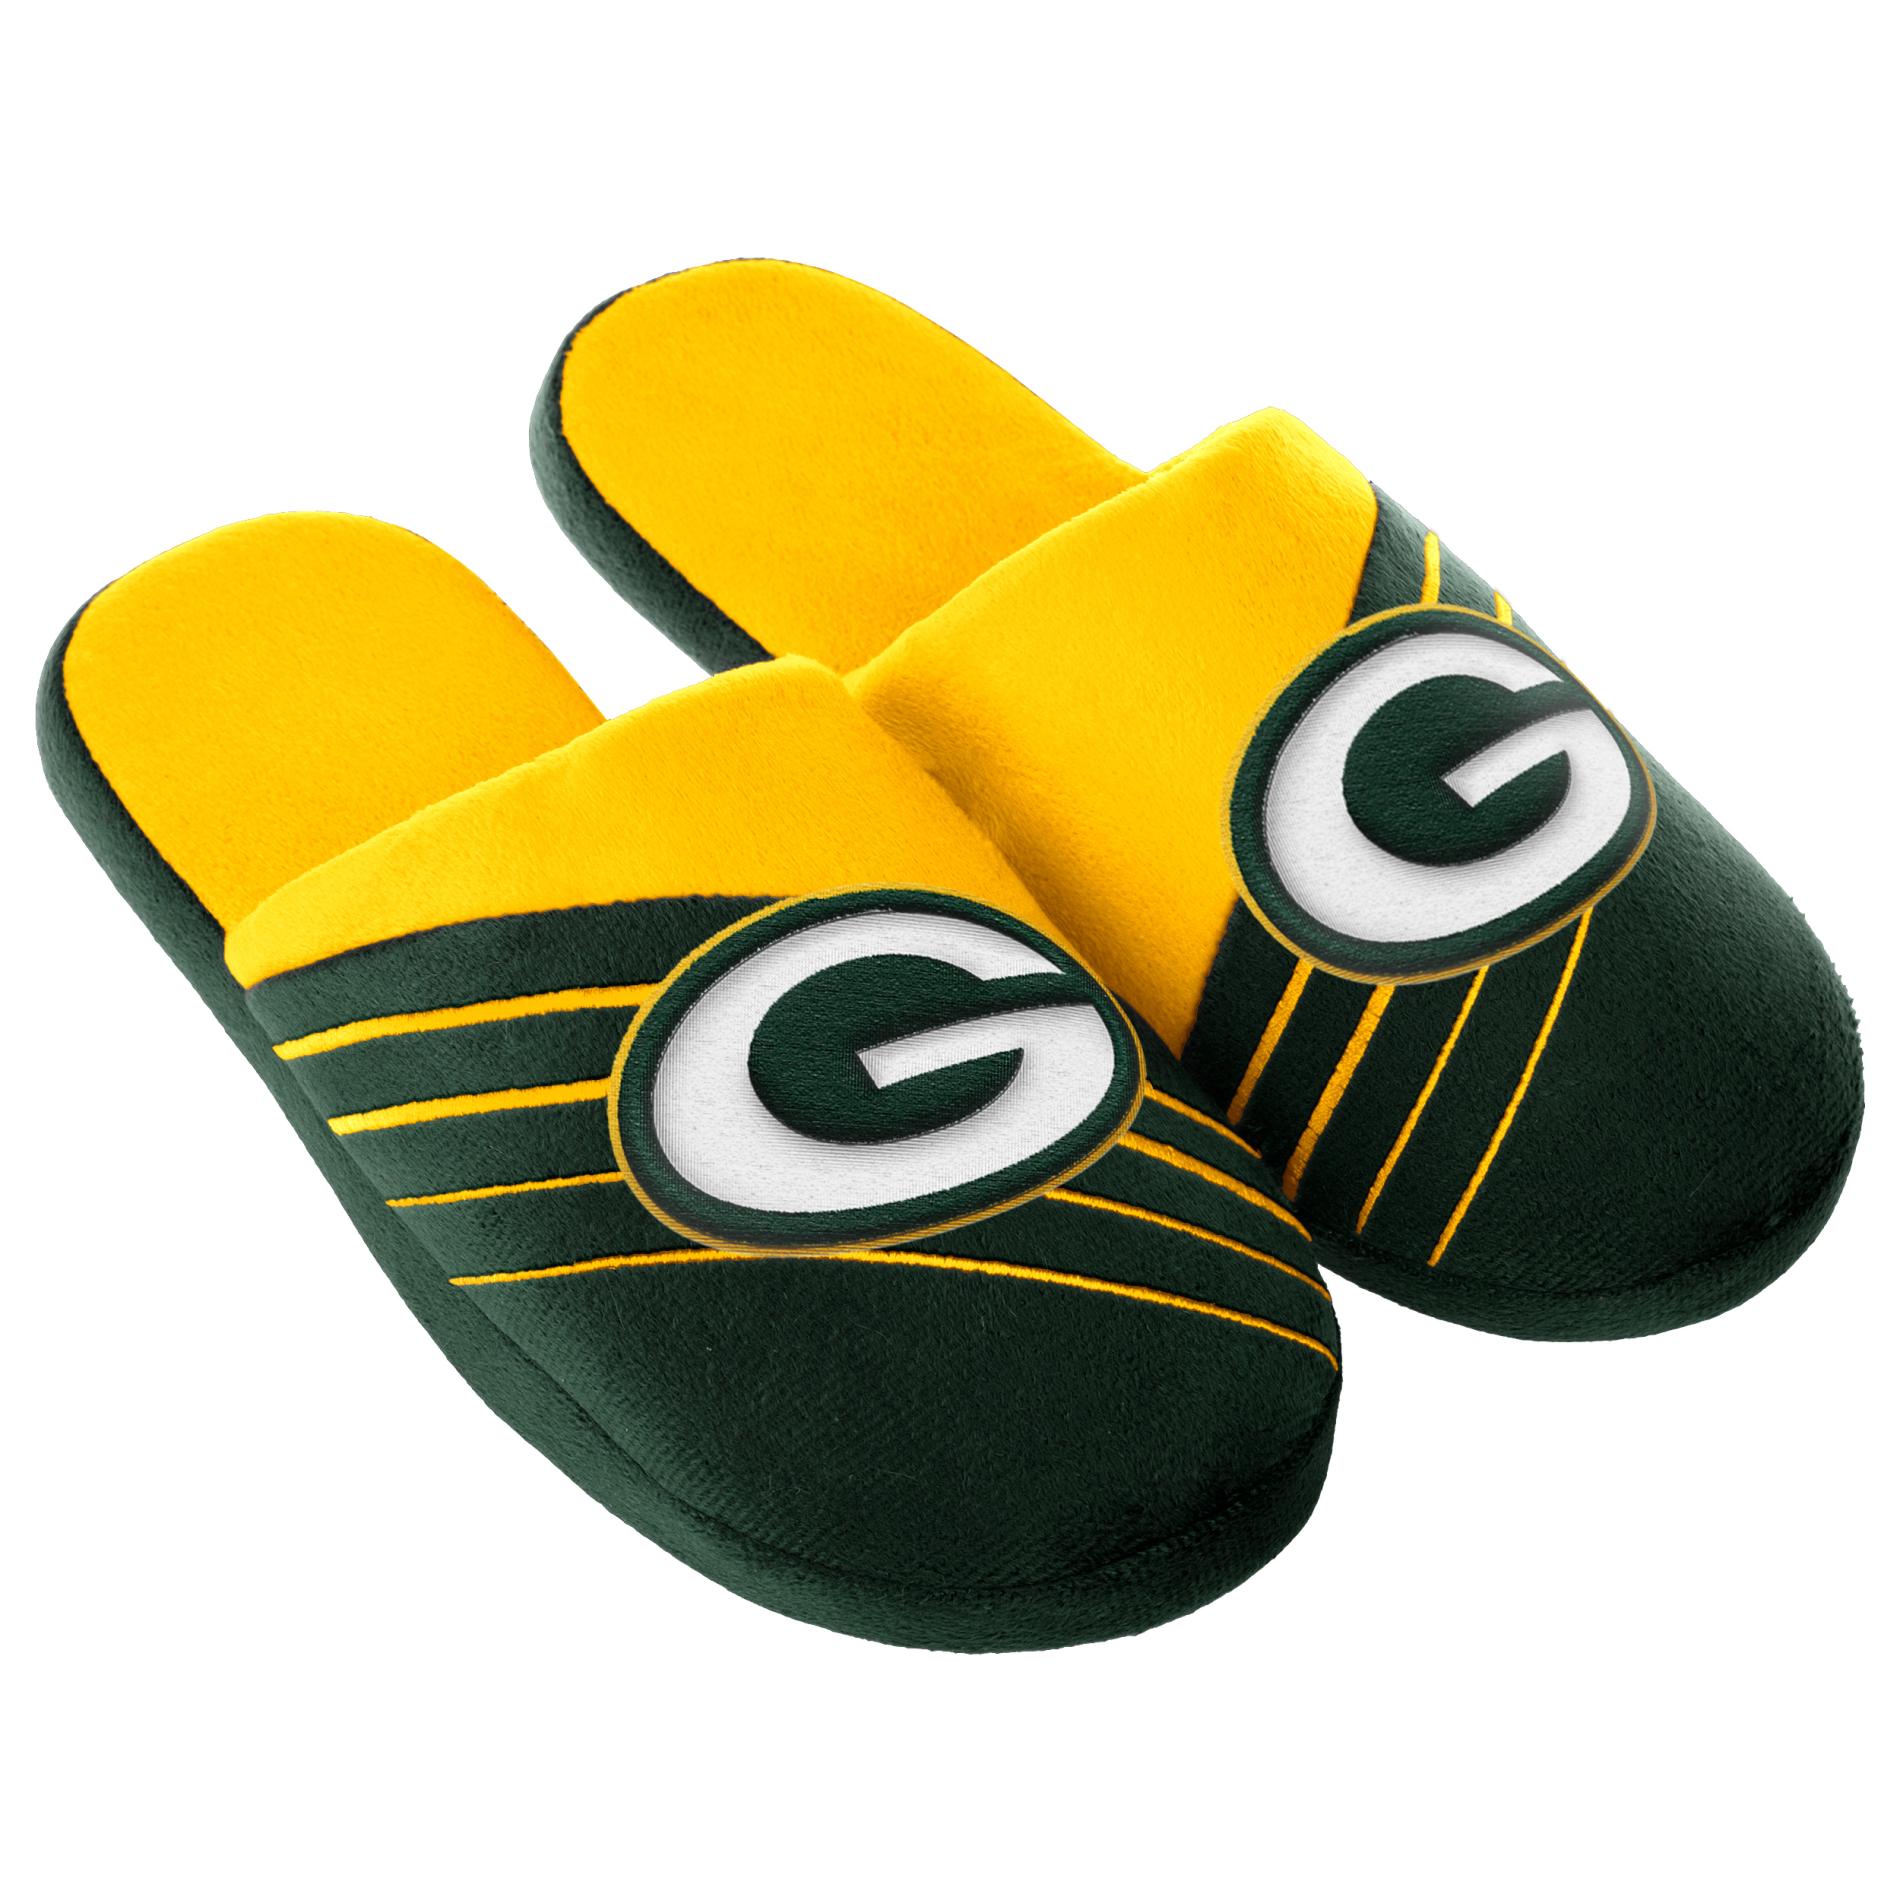 NFL Men's Green Bay Packers Green/Yellow Slippers